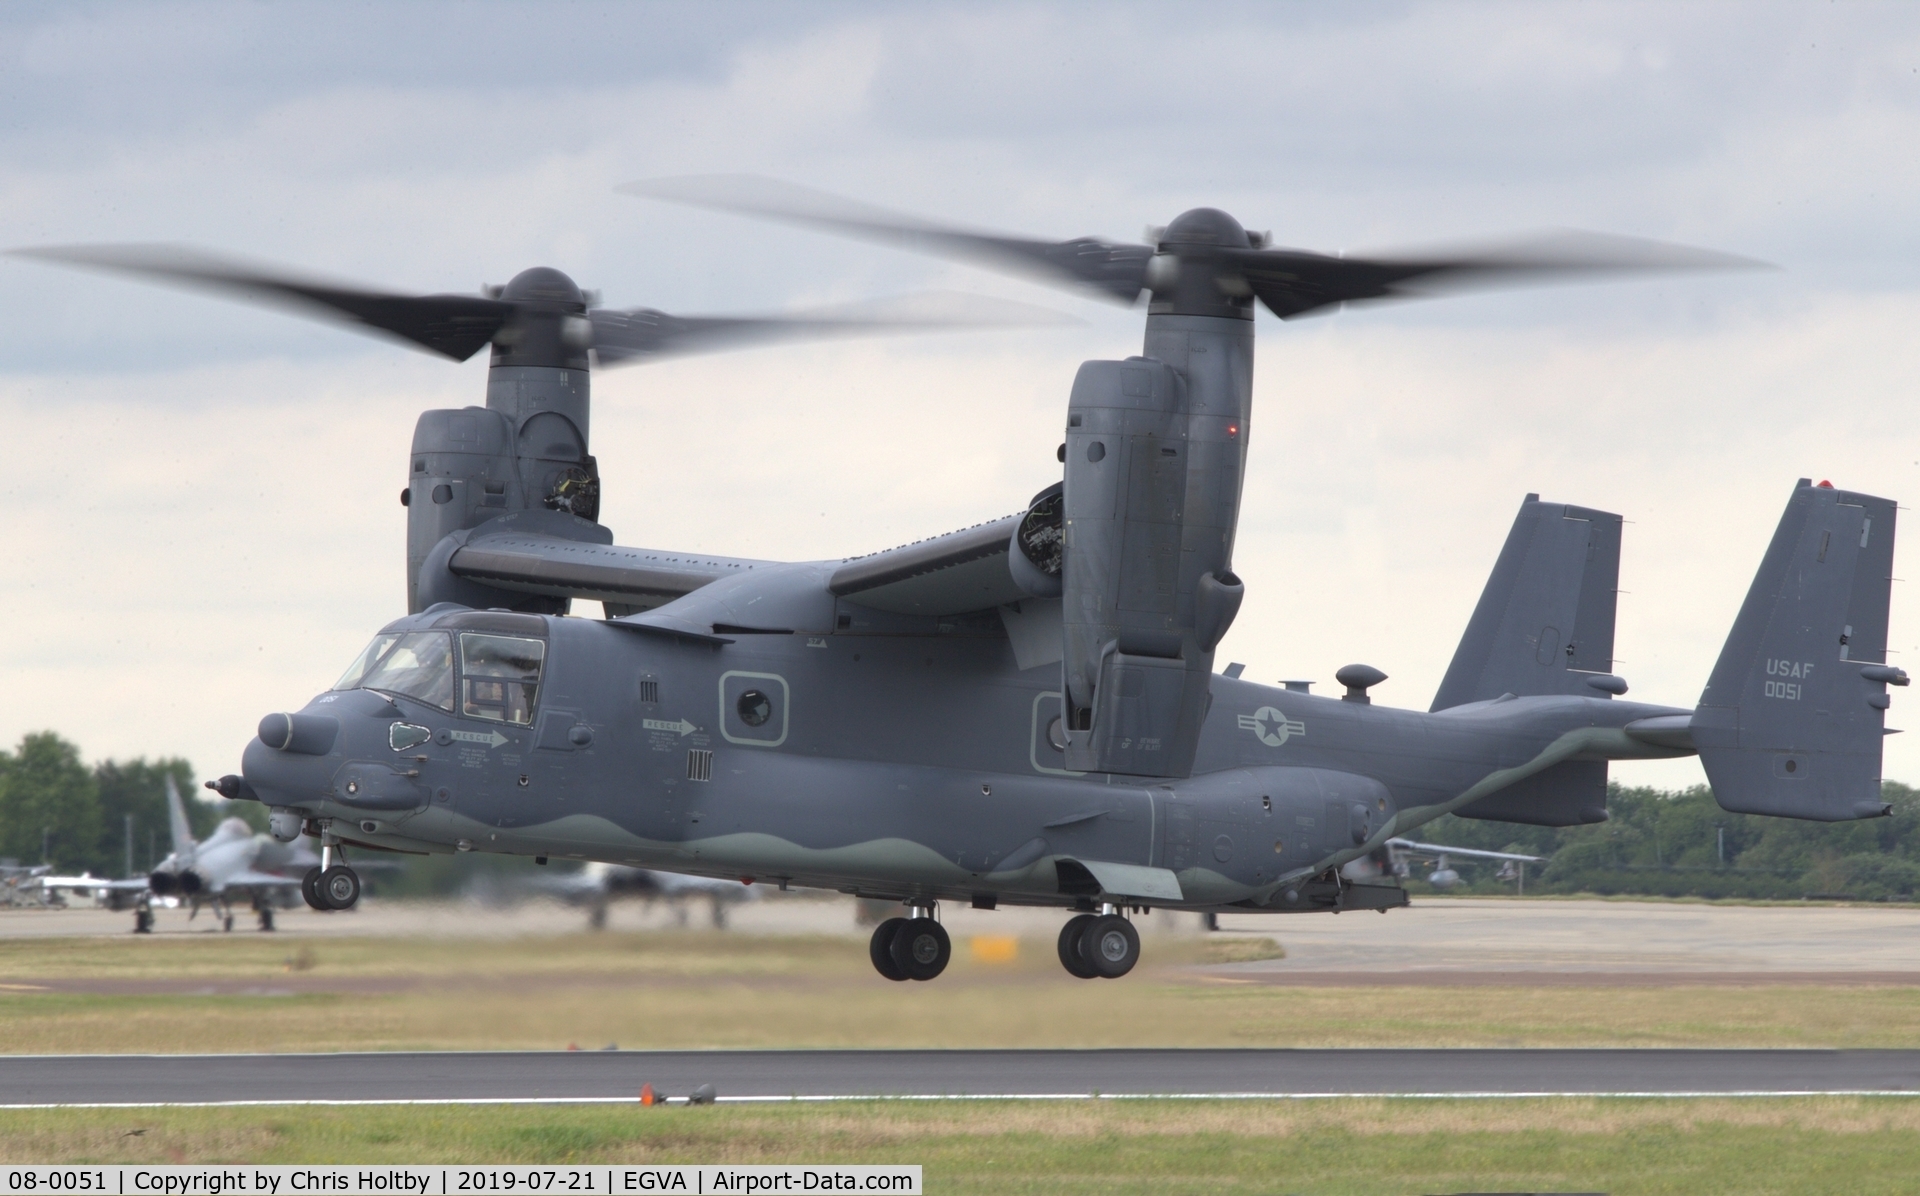 08-0051, Bell-Boeing CV-22B Osprey C/N D1042, Osprey landing after a very well-received display at RIAT 2019 RAF Fairford